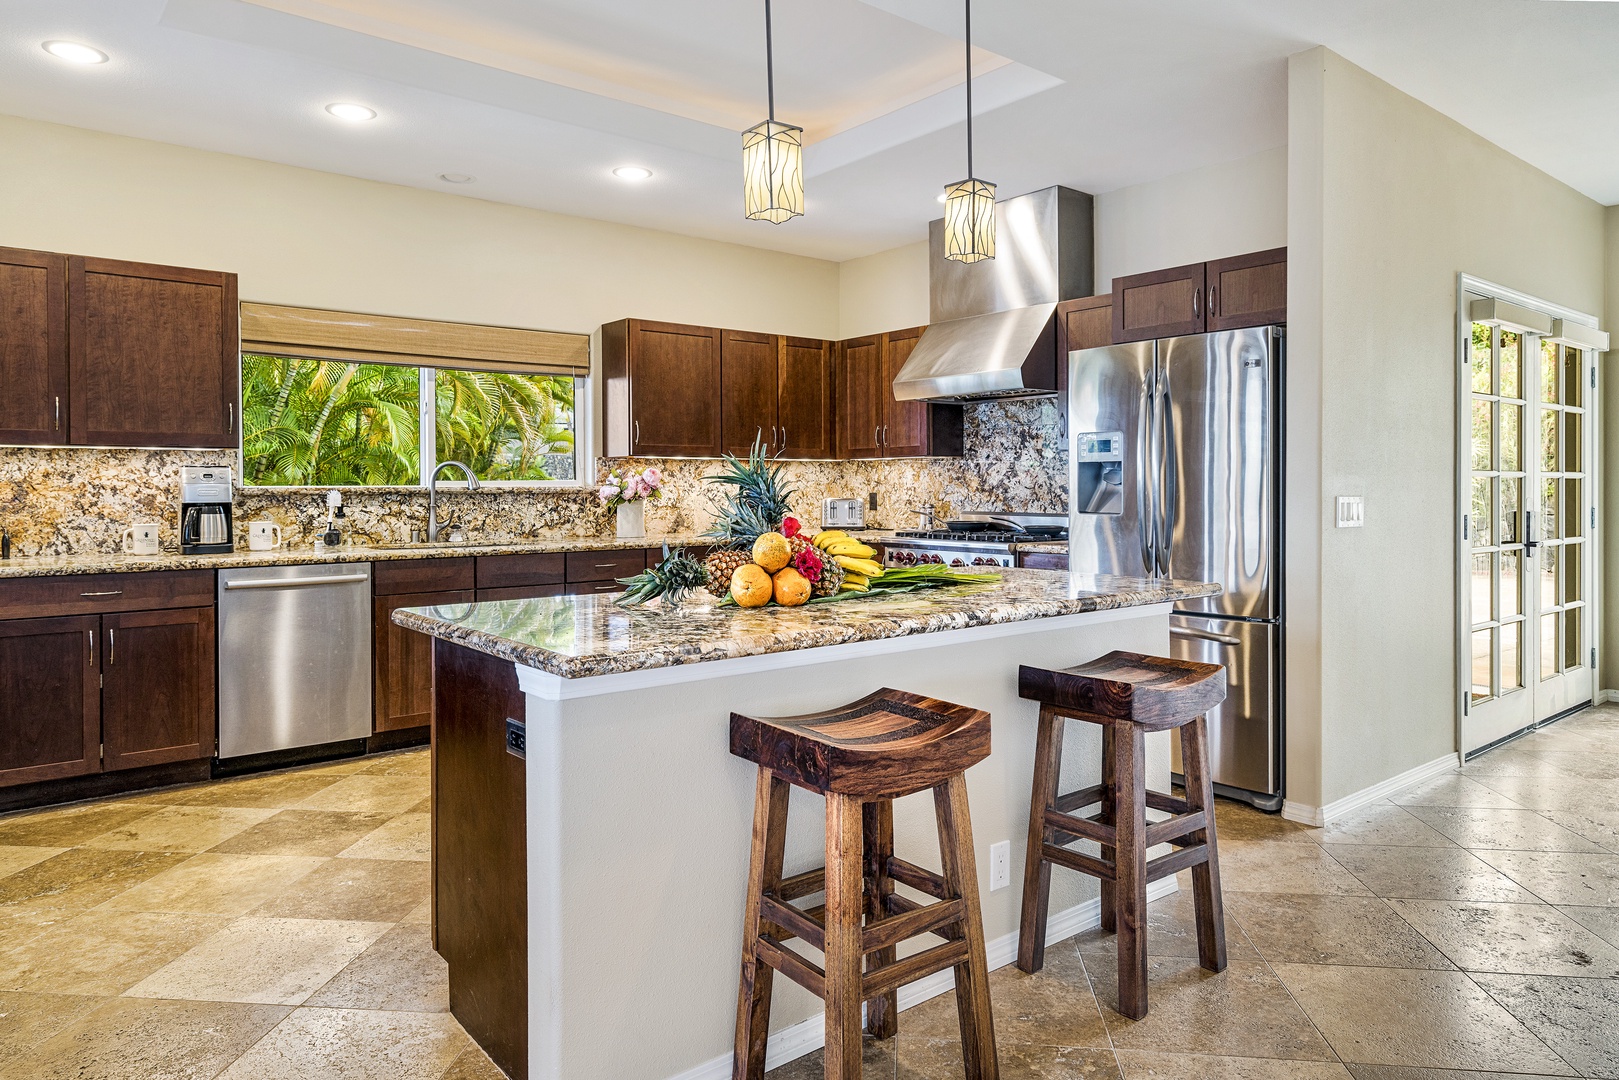 Kailua Kona Vacation Rentals, Sunset Hale - Gourmet kitchen with all the fixing to prepare your favorite meals!